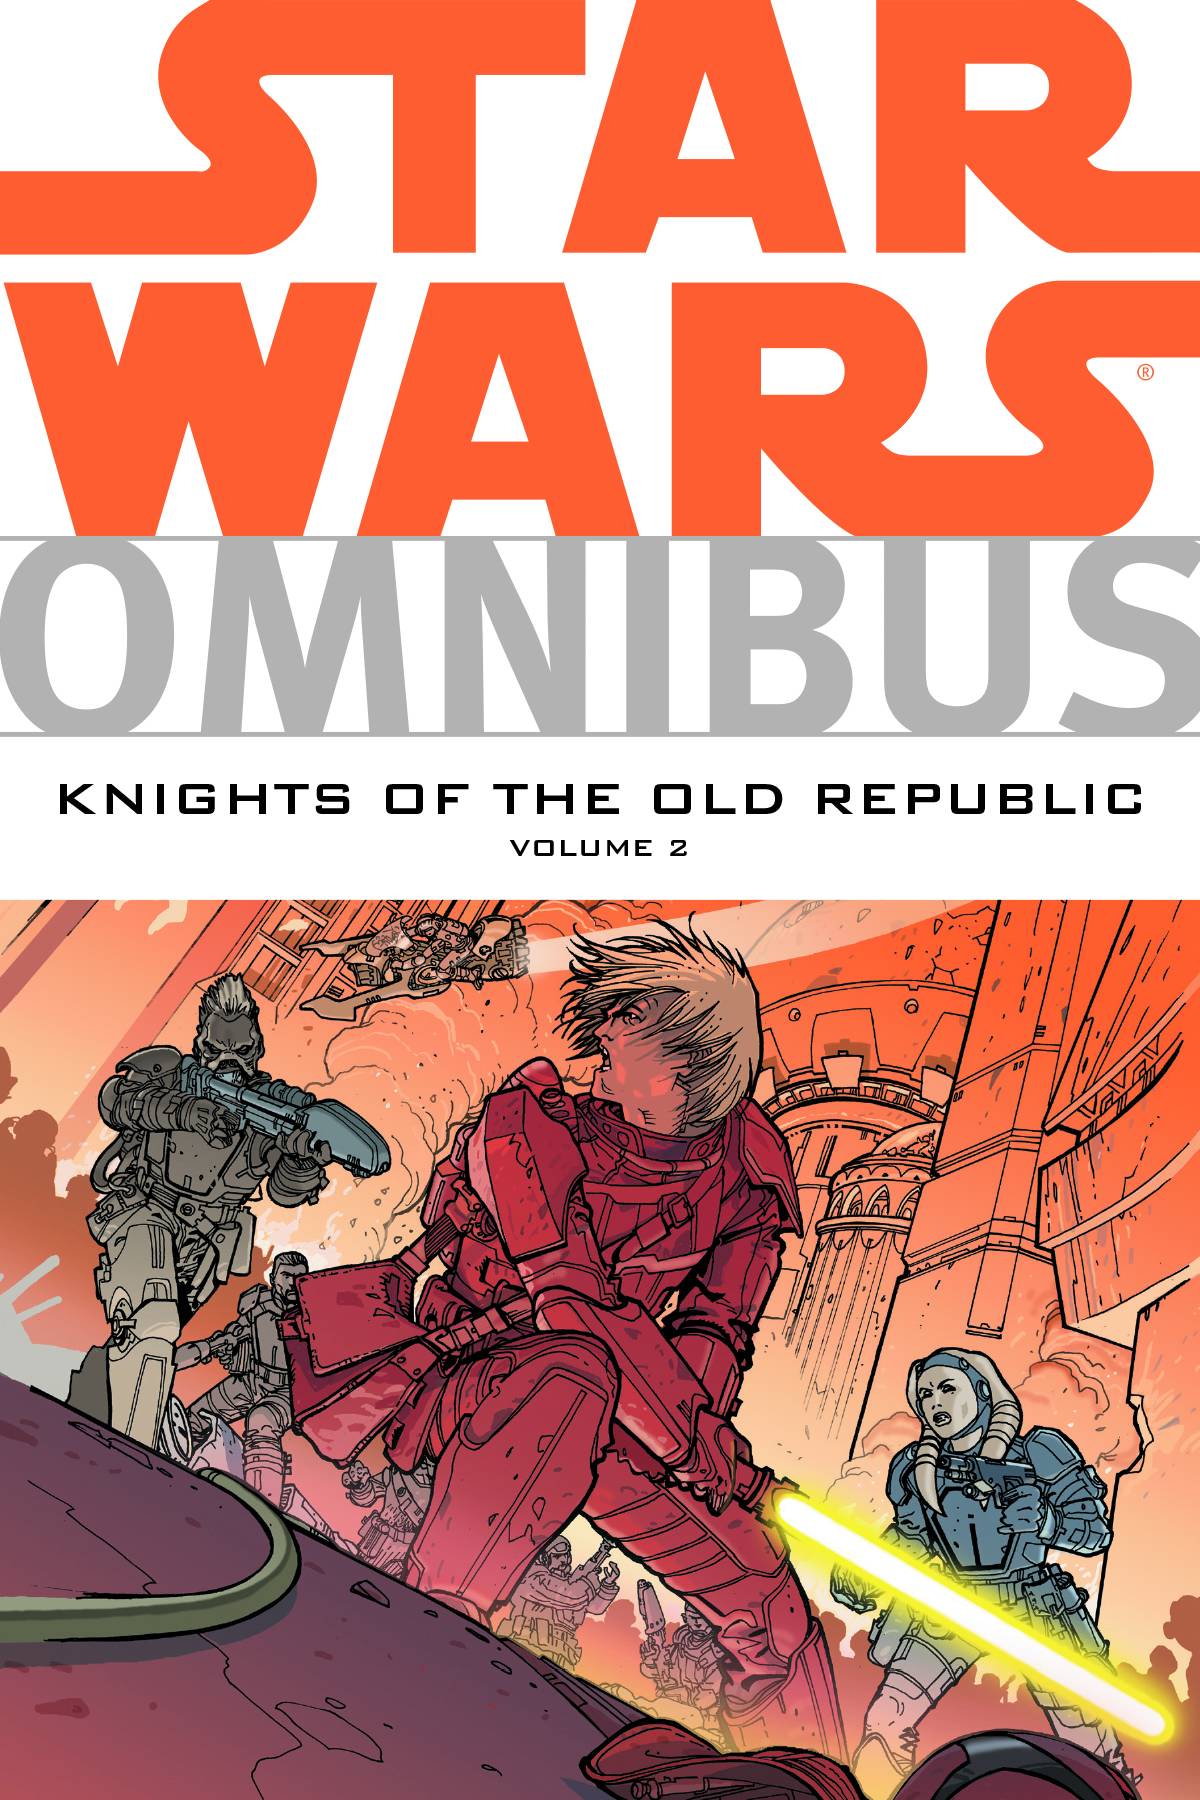 Star Wars Omnibus Knights of the Old Republic Graphic Novel Volume 2